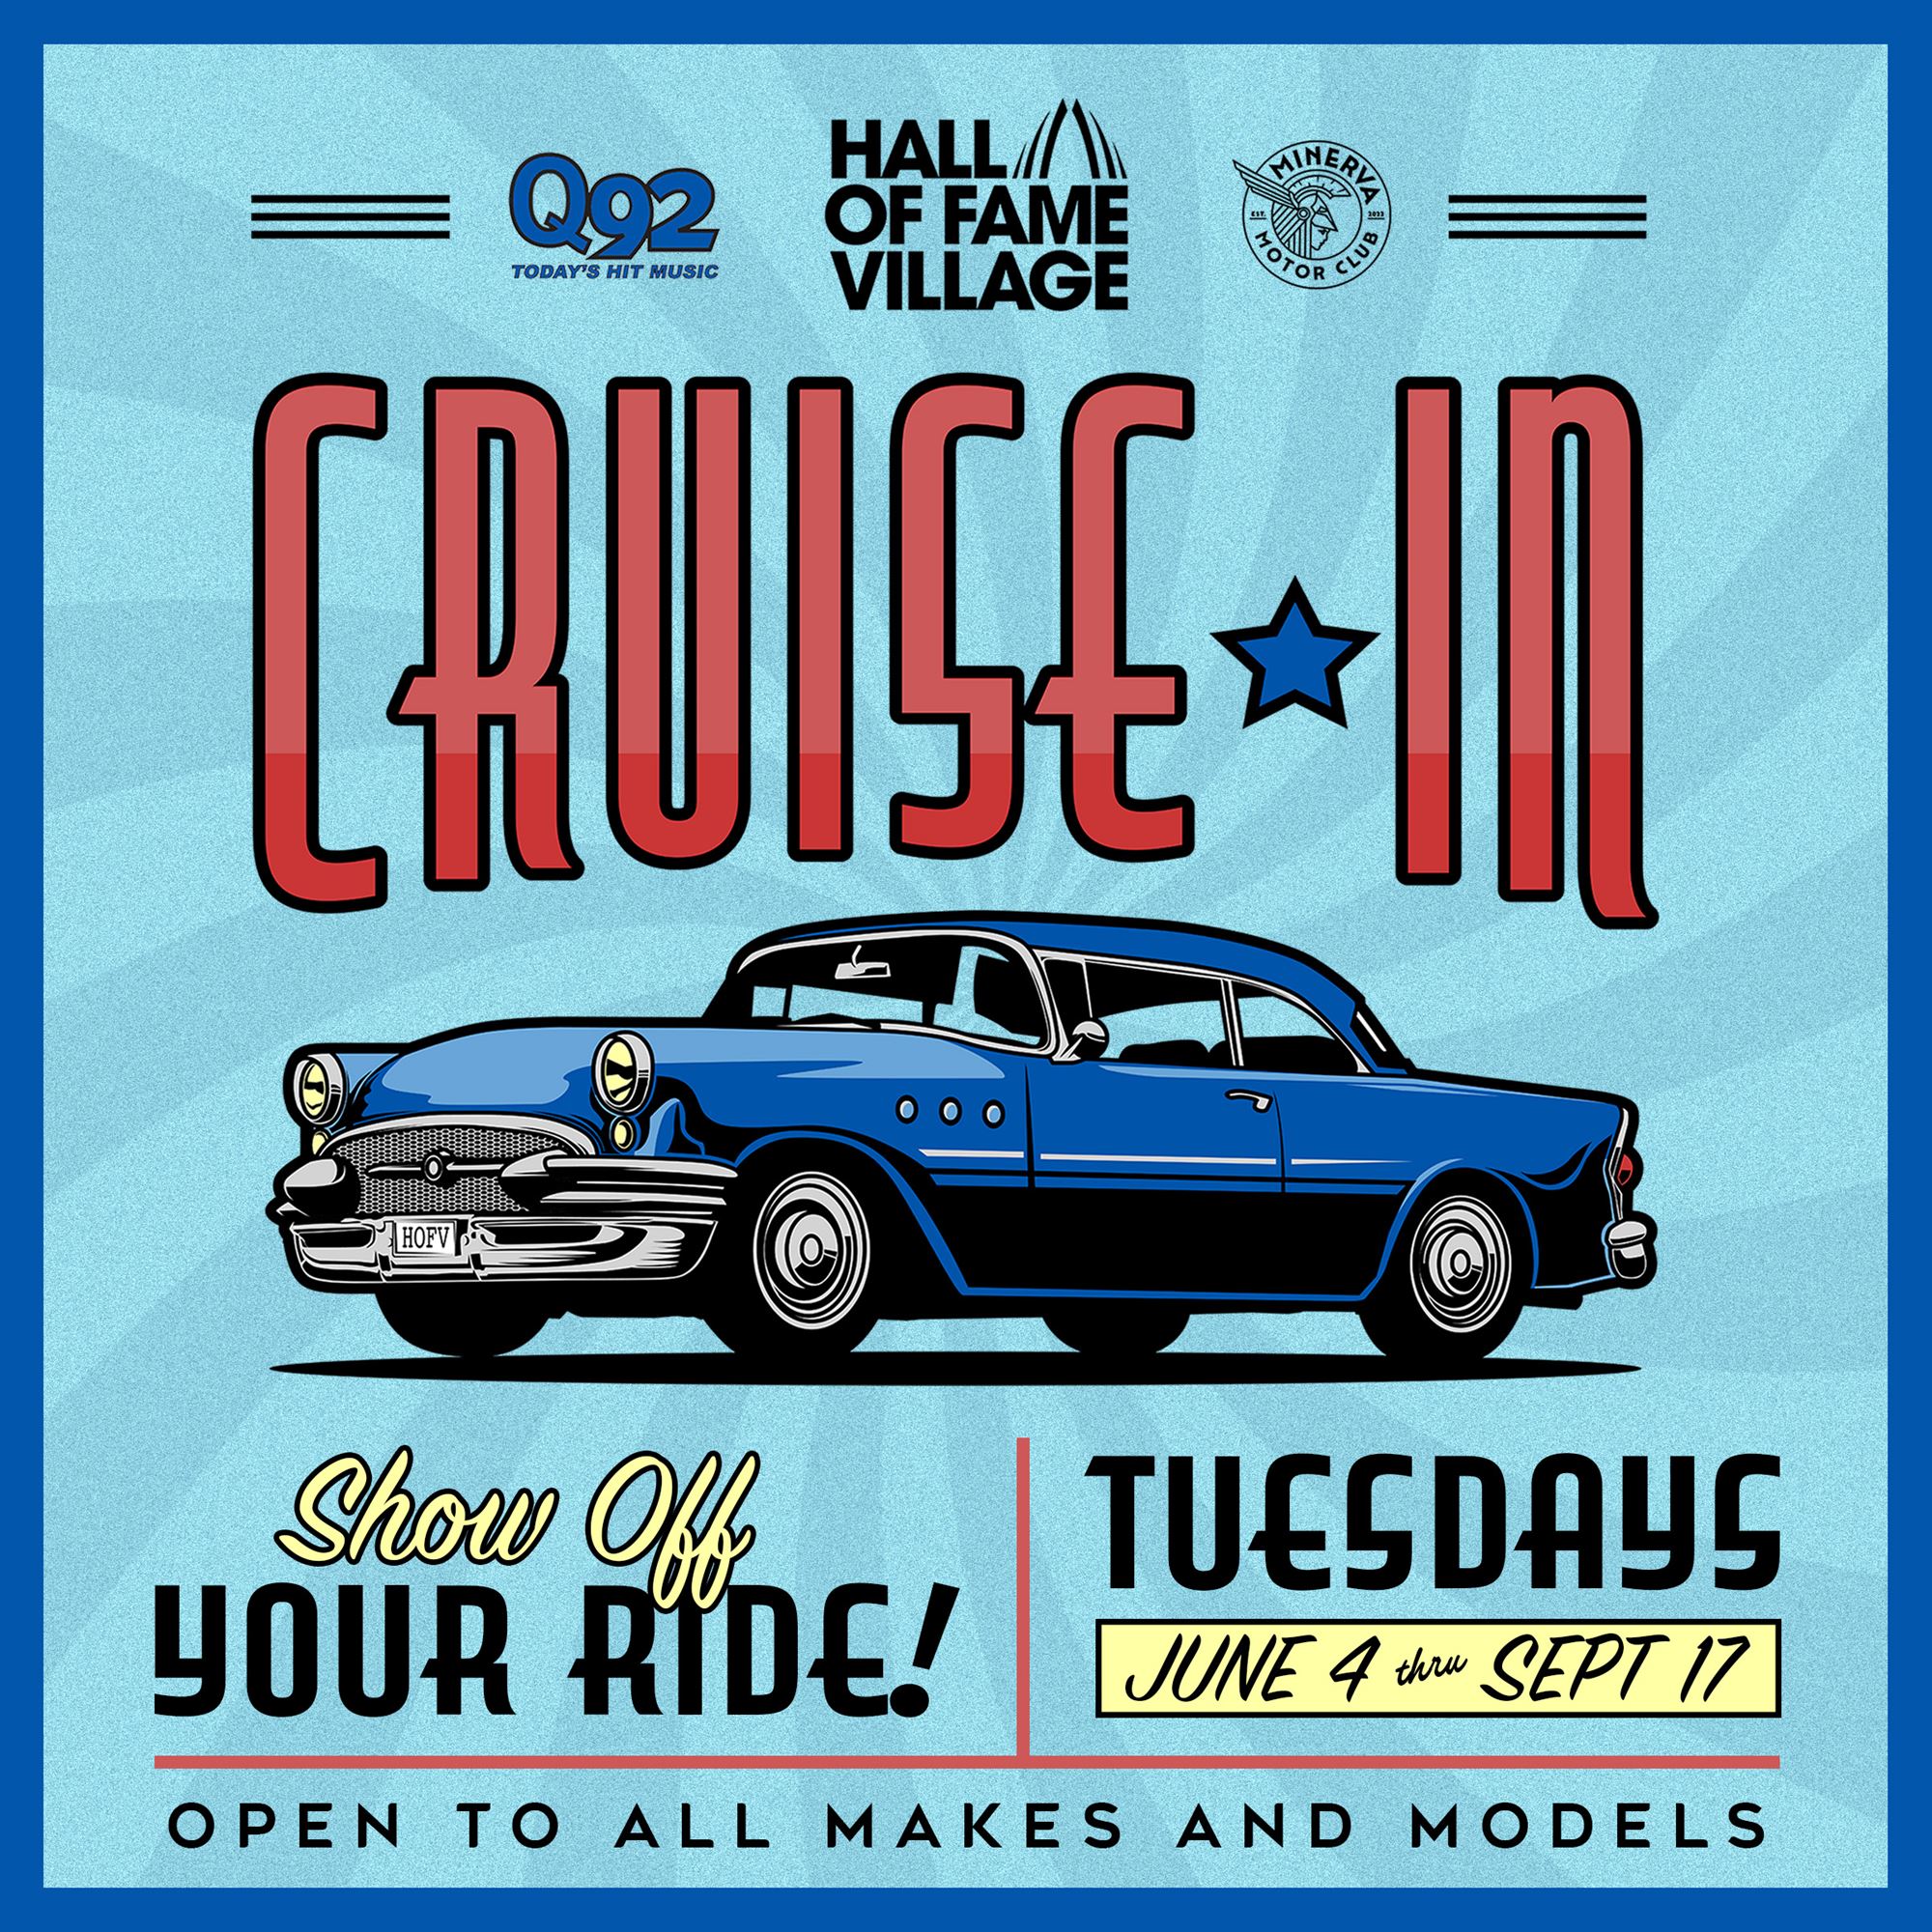 Hall of Fame Village Announces Exciting Cruise-In Events with Q92 Radio and Minerva Motor Club